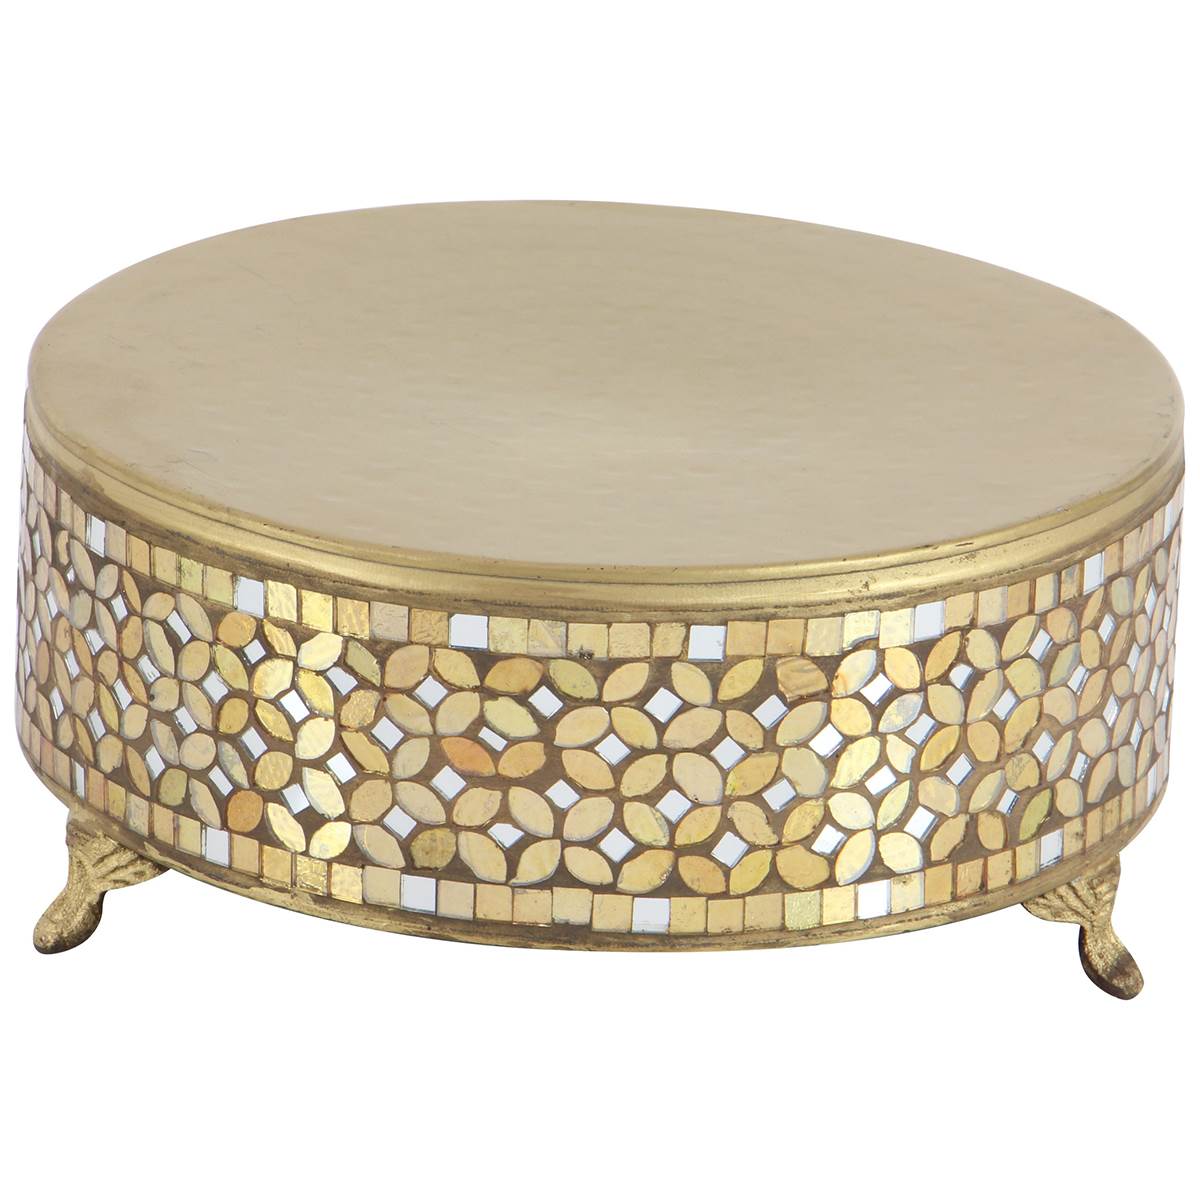 9th & Pike(R) Metal & Glass Mosaic Tiered Cake Stand